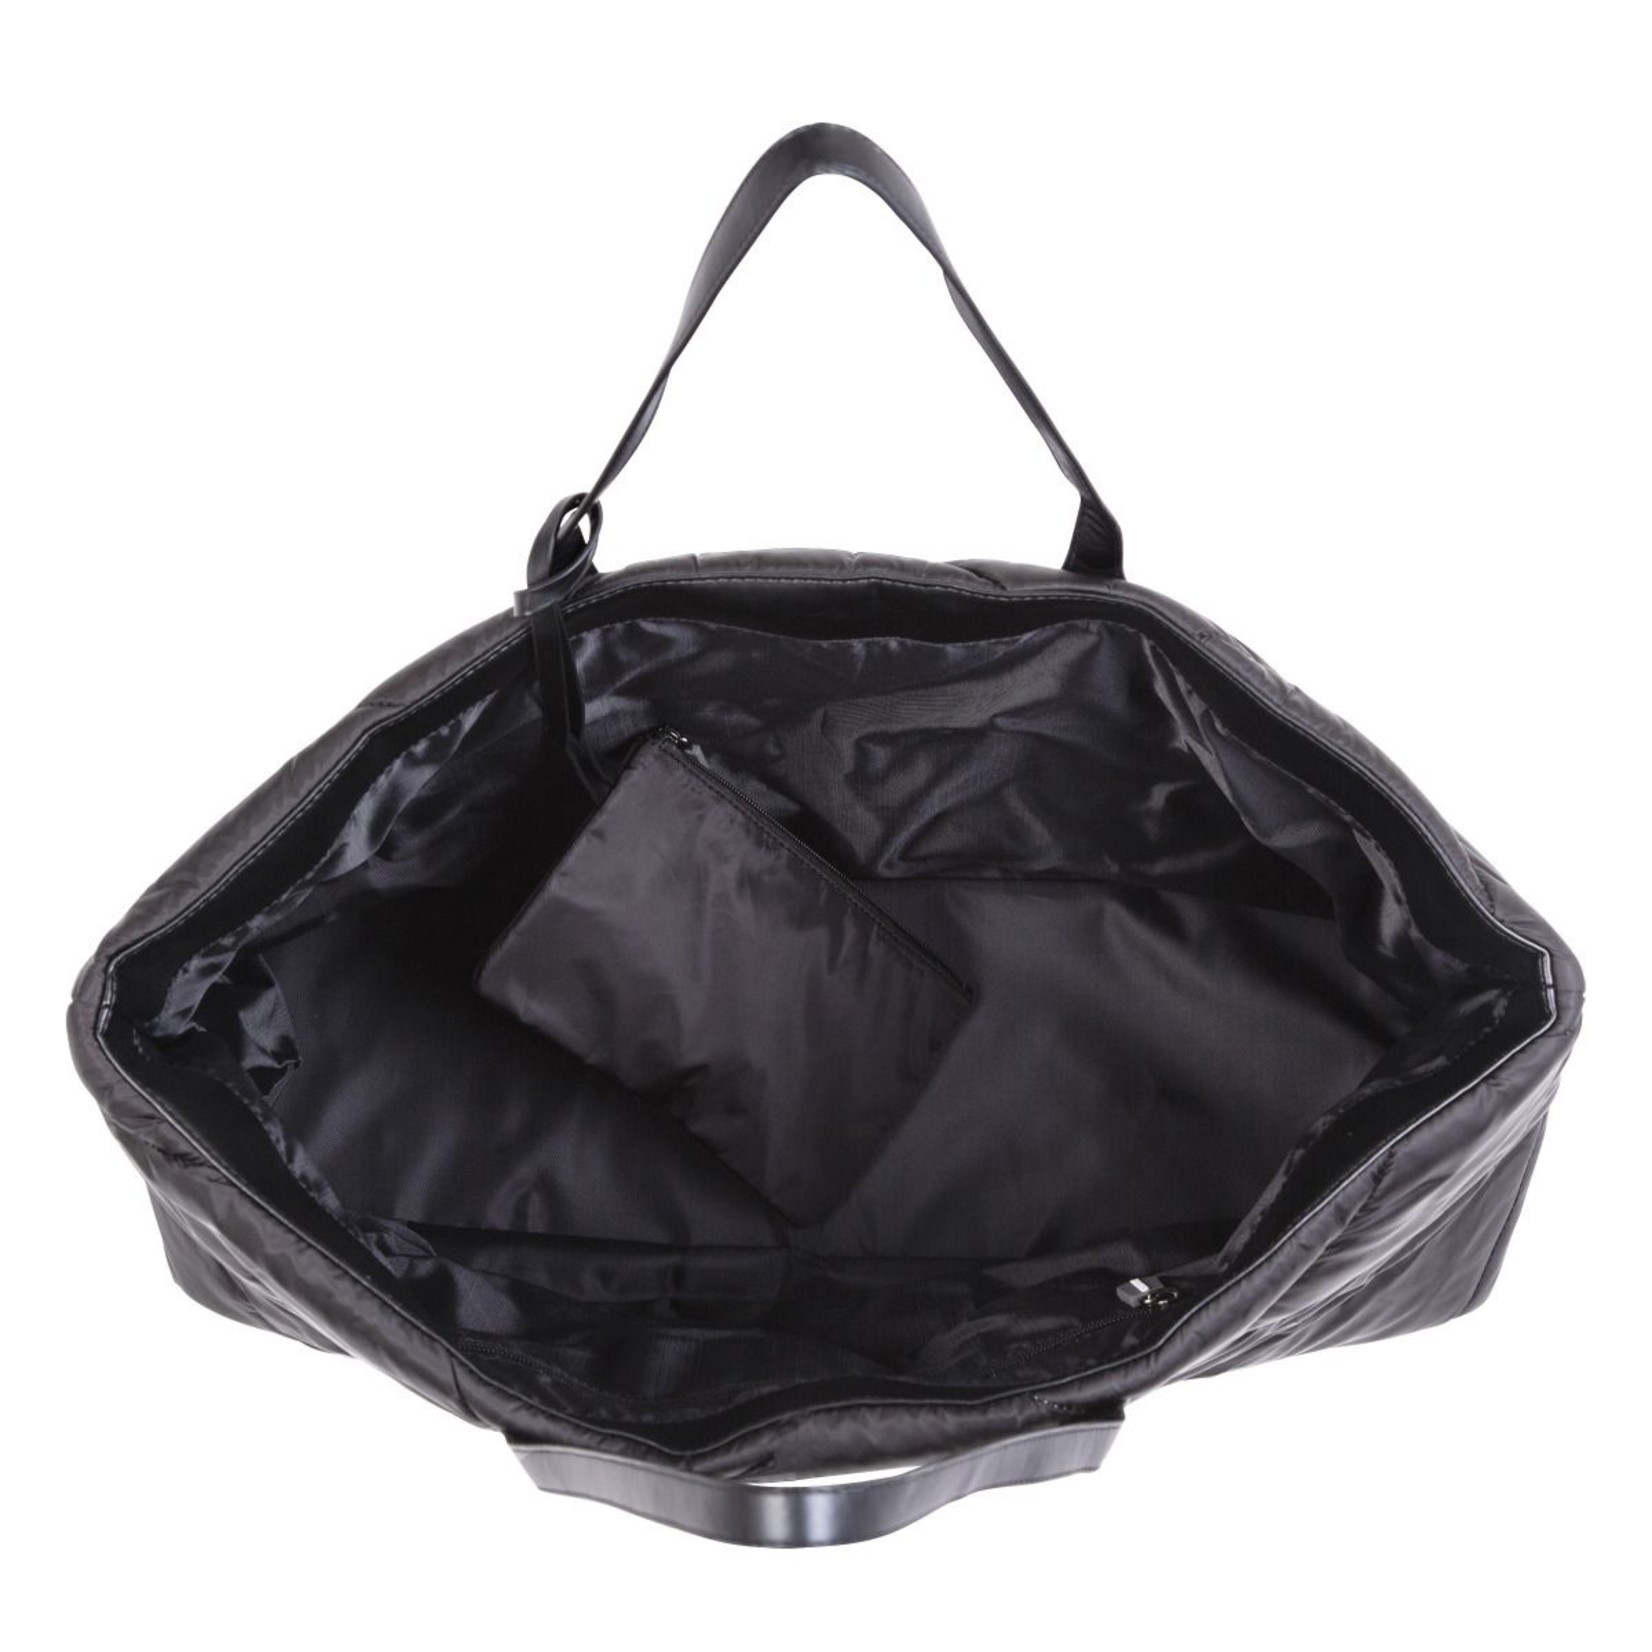 Childhome Family Bag Puffered Black